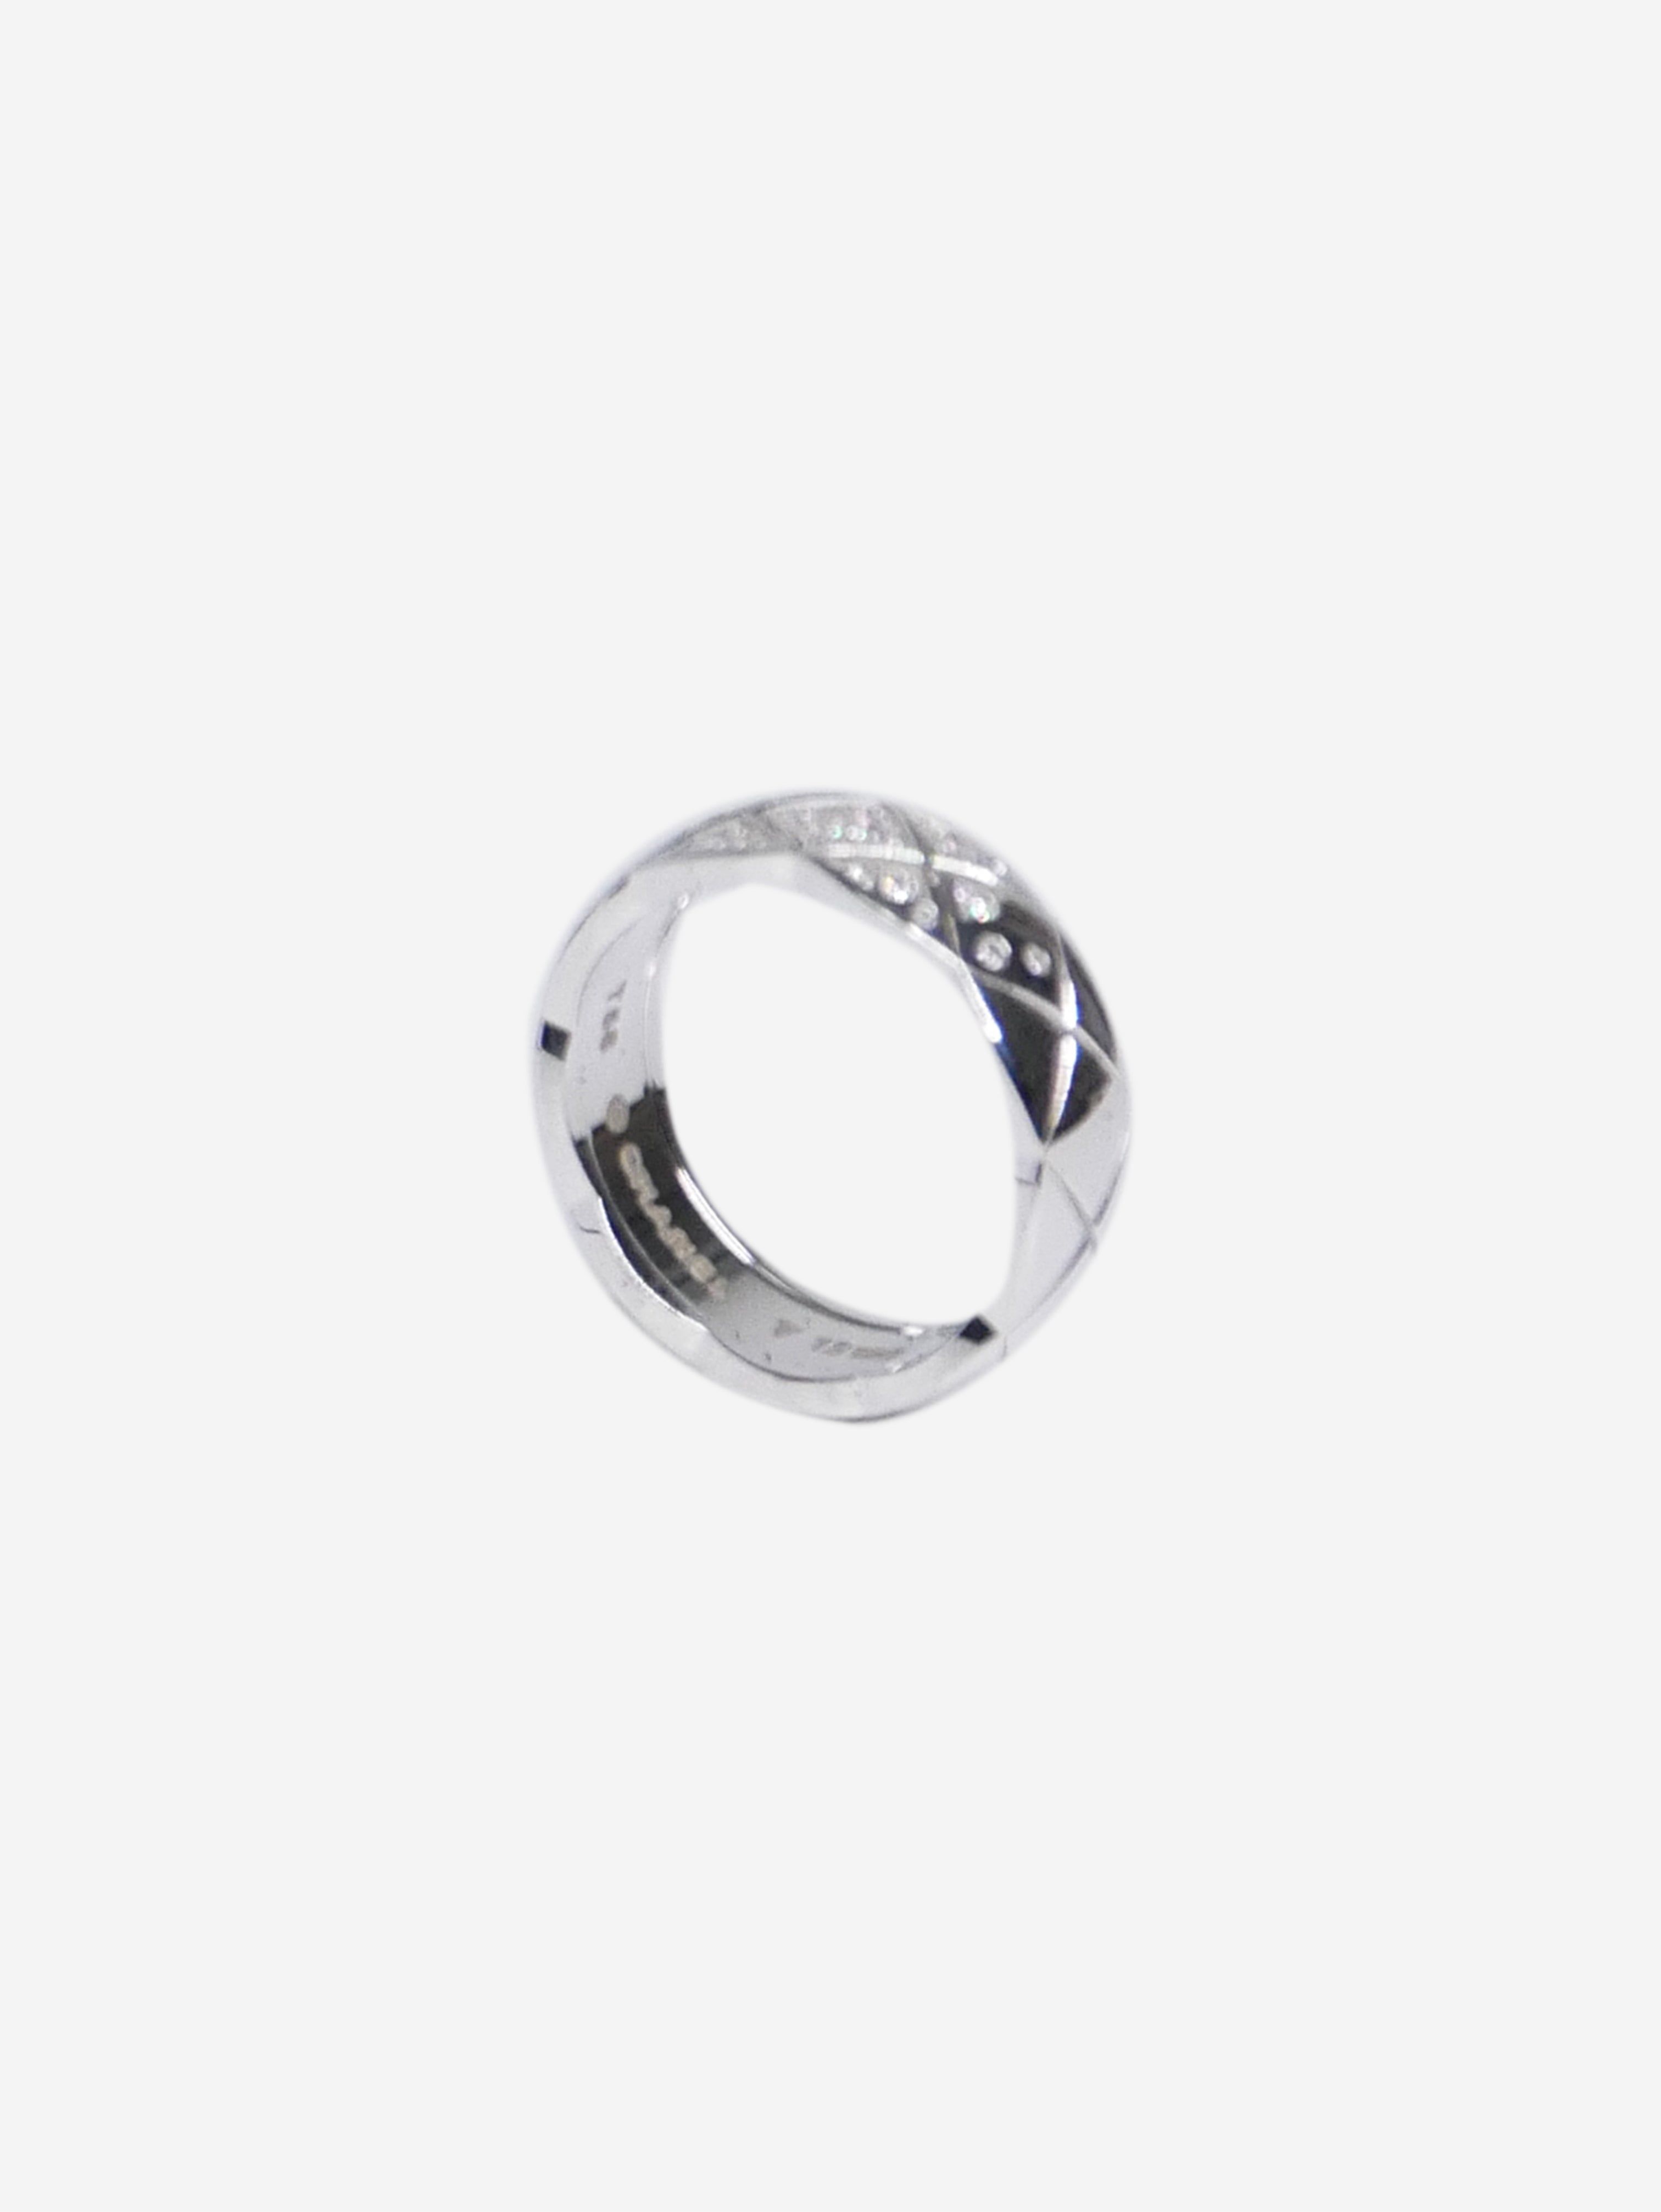 Chanel White gold and diamond Coco Crush ring